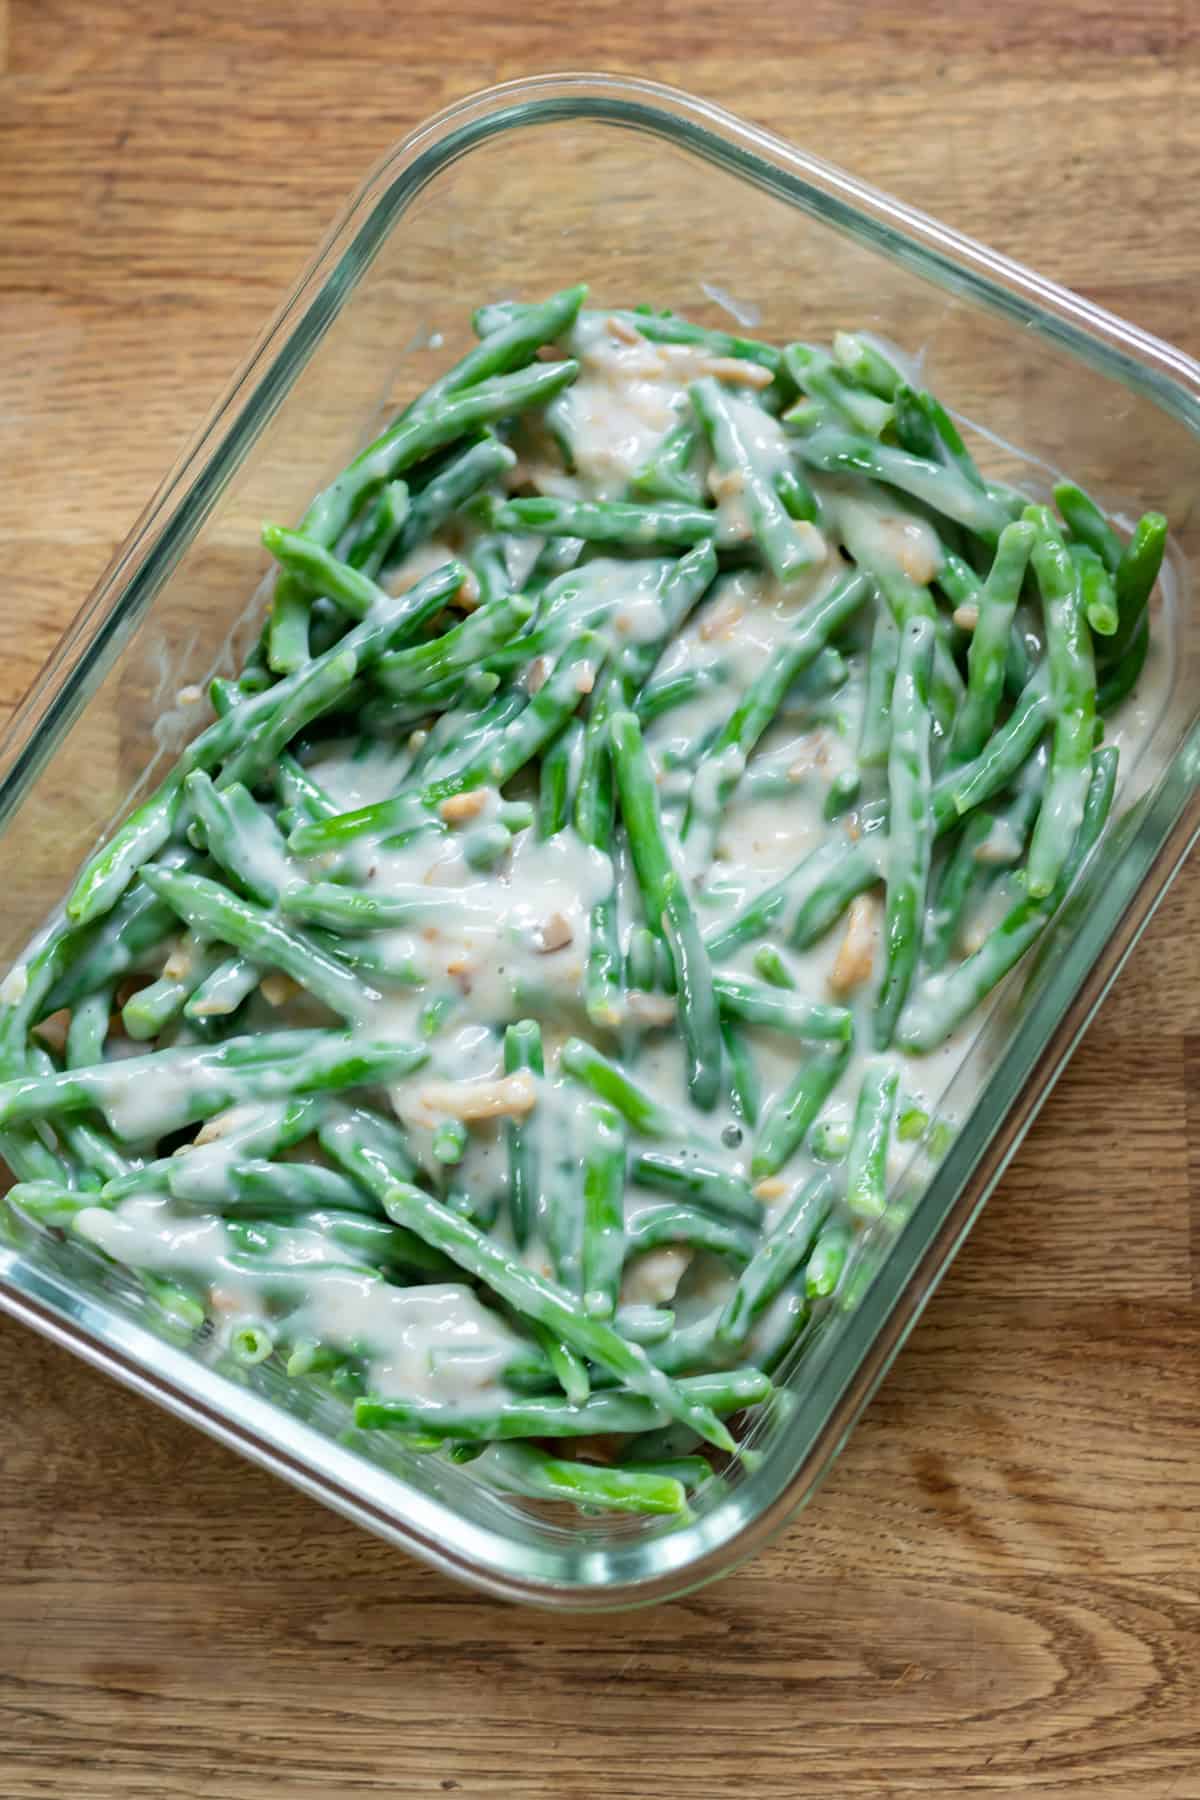 Mixed sauce and green beans in a large glass dish.